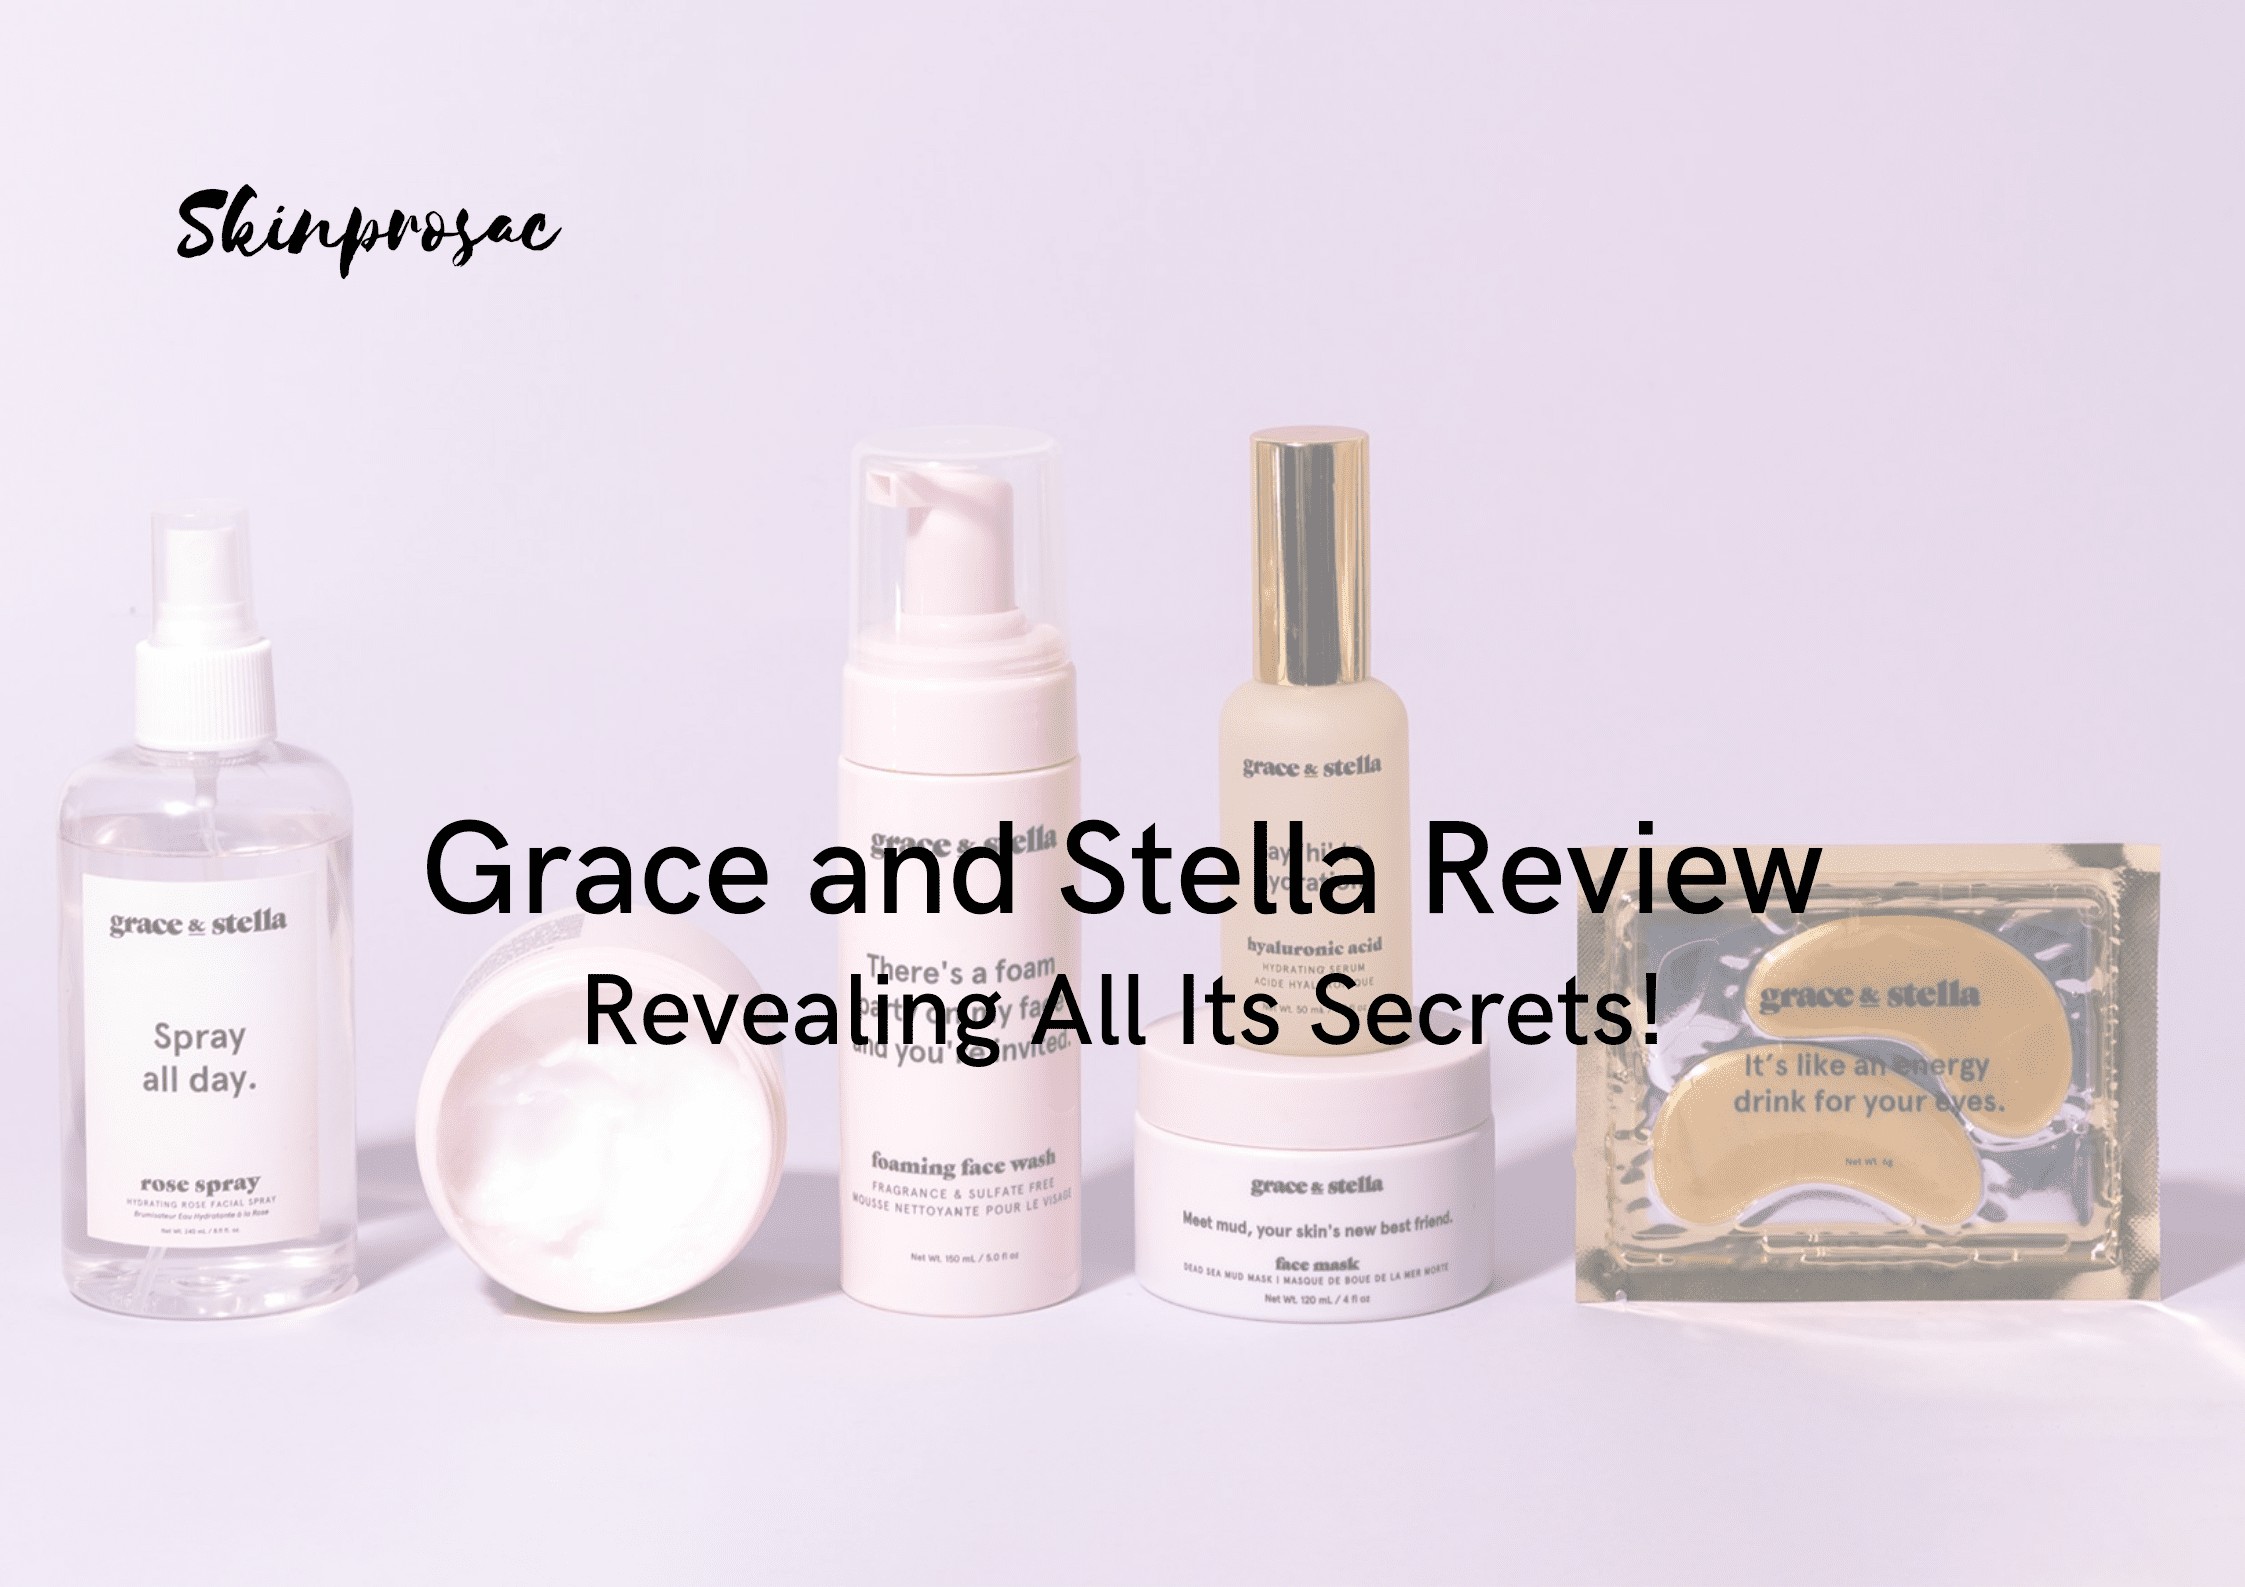 Grace and Stella Review